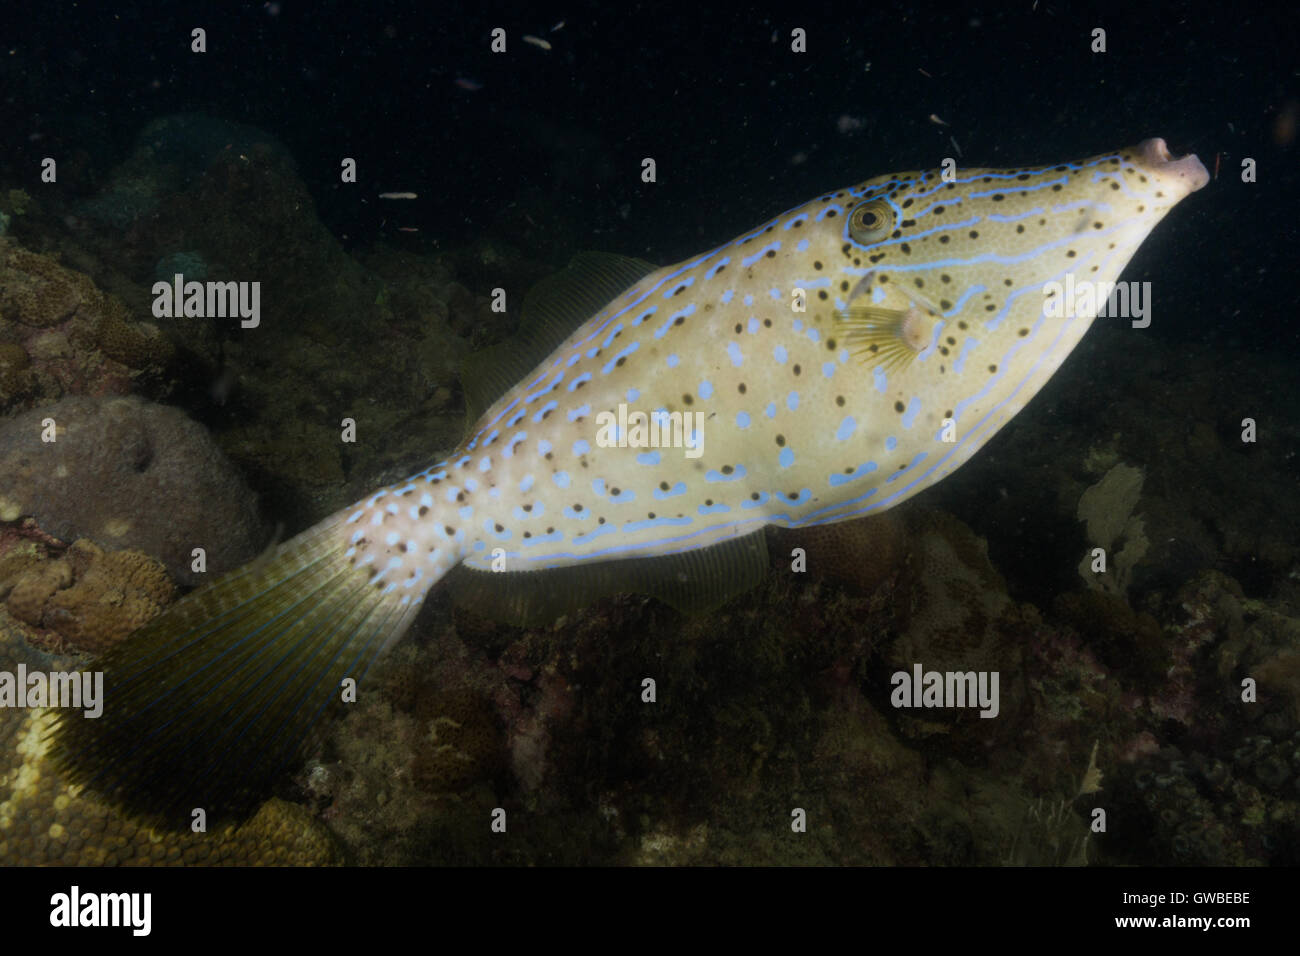 Aluterus scriptus, commonly known as scrawled filefish, broomtail filefish or scribbled leatherjacket. Abrolhos, Bahia, Brazil. Stock Photo